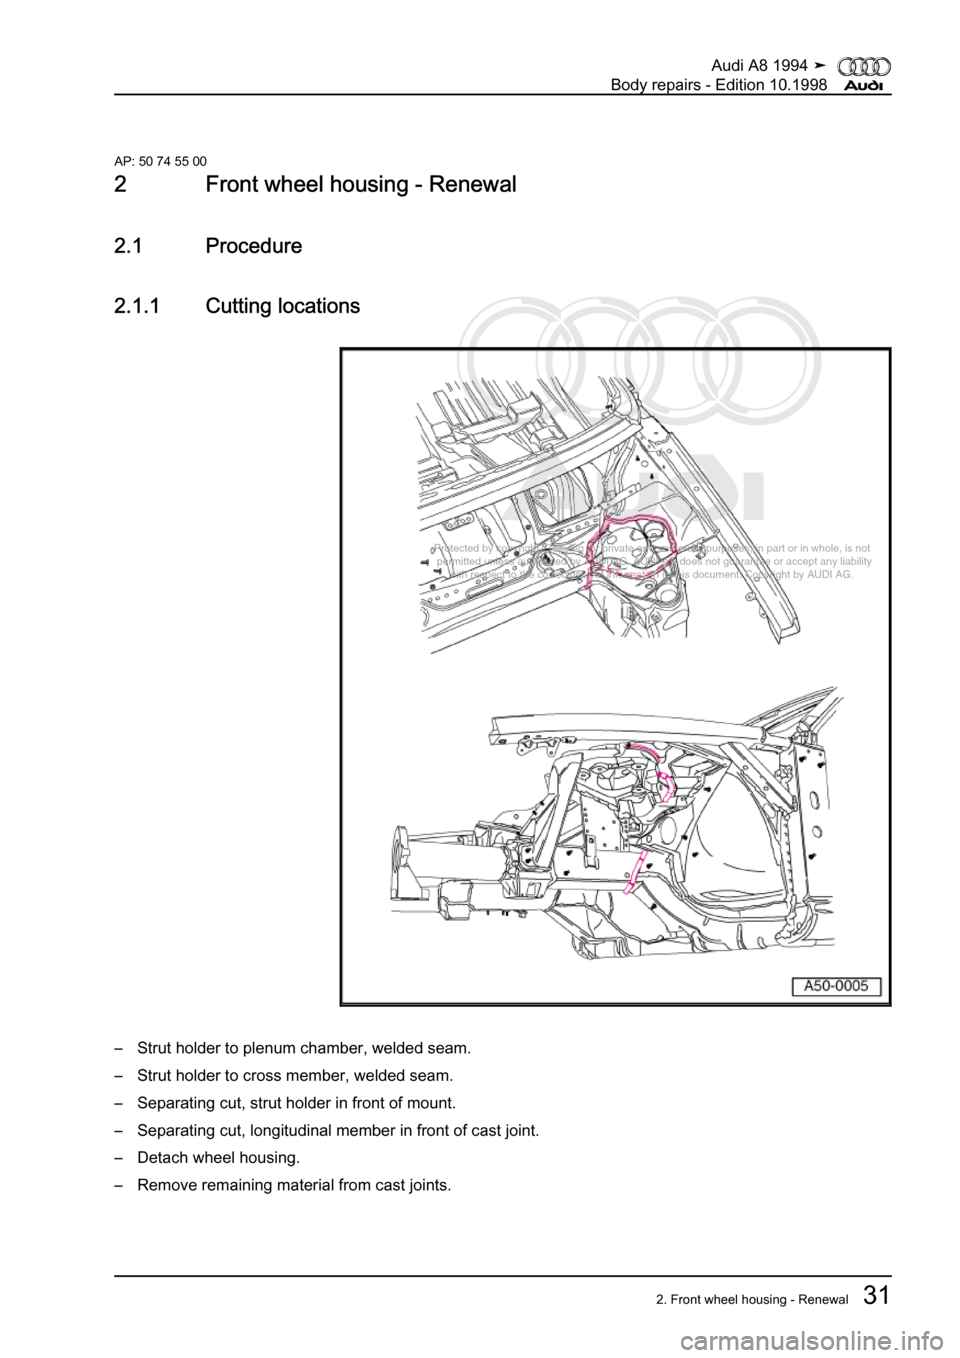 AUDI A8 1994 D4 / 1.G Body Repairs Owners Guide 
Protected by copyright. Copying for private or commercial purposes, in p\
art or in whole, is not 
 permitted unless authorised by AUDI AG. AUDI AG does not guarantee or a\
ccept any liability 
     